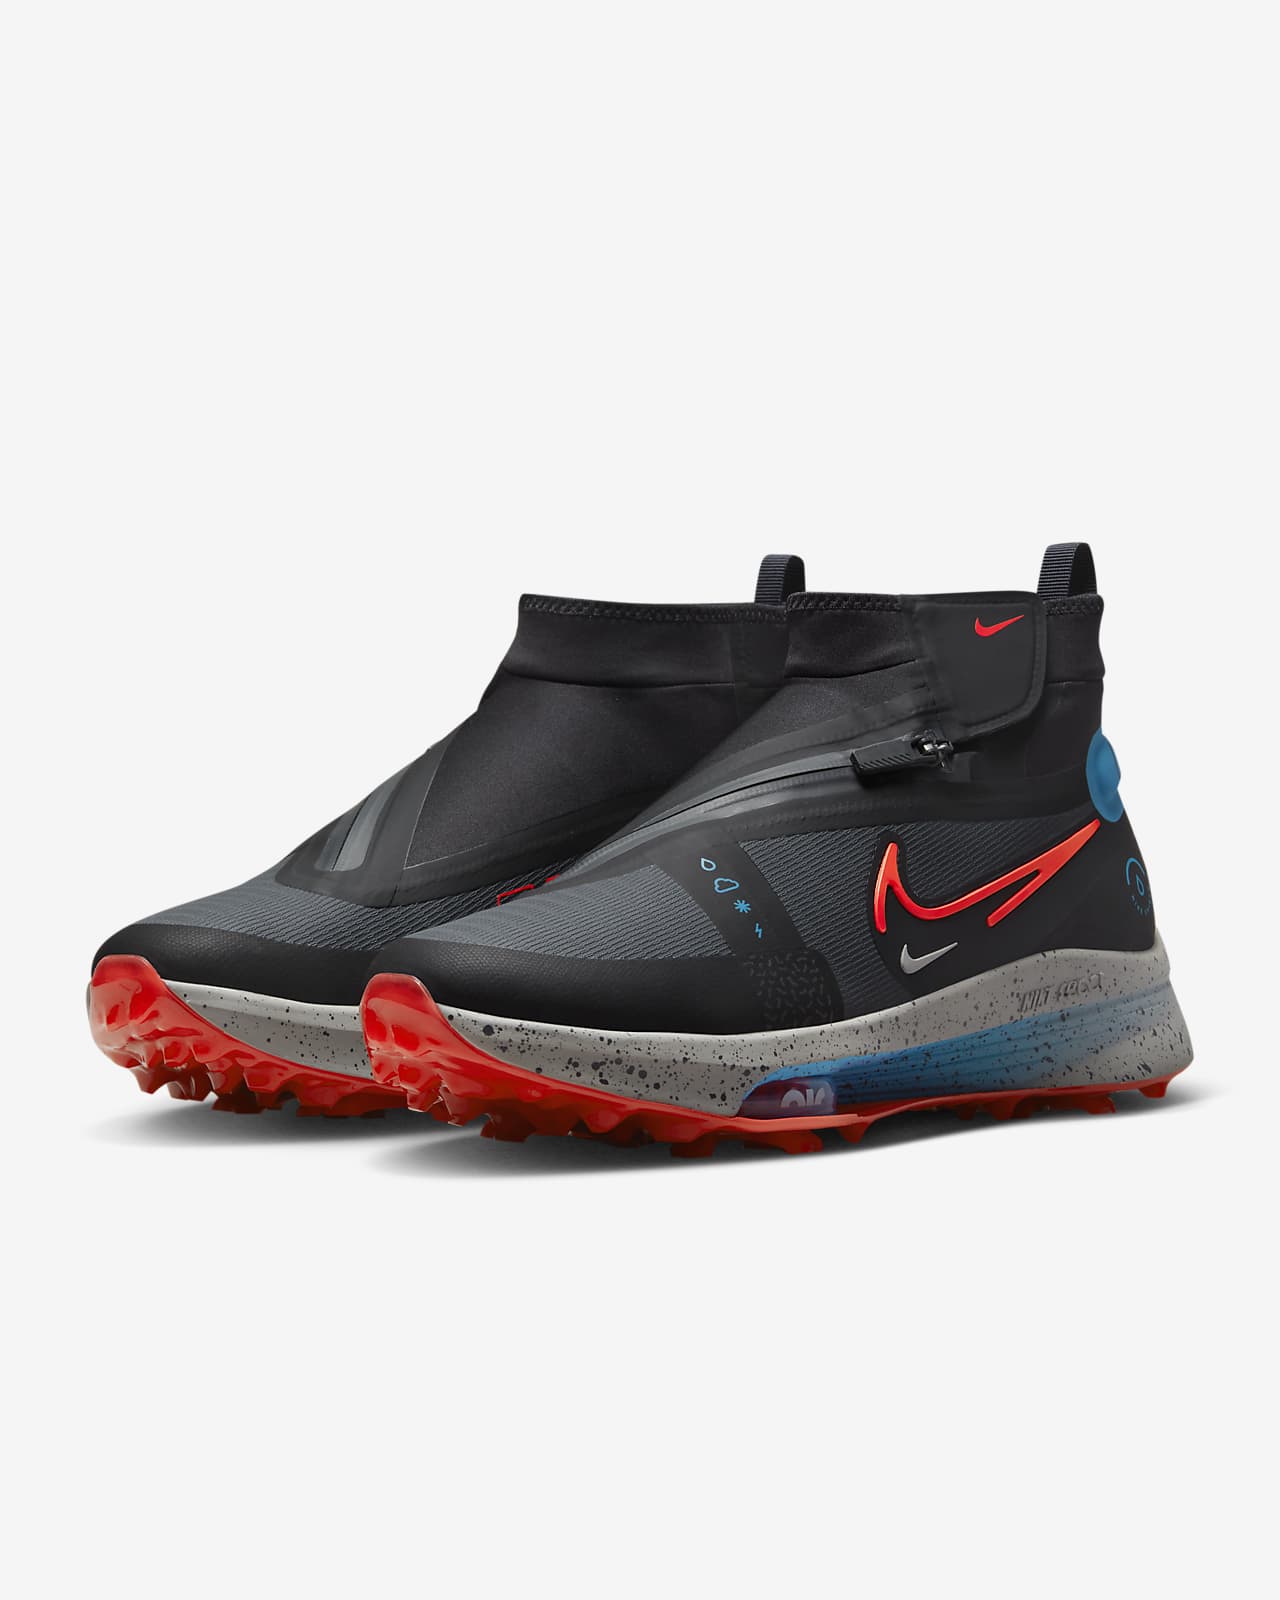 Nike Air Zoom Infinity Tour 2 Shield Men's Weatherized Golf Shoes. 